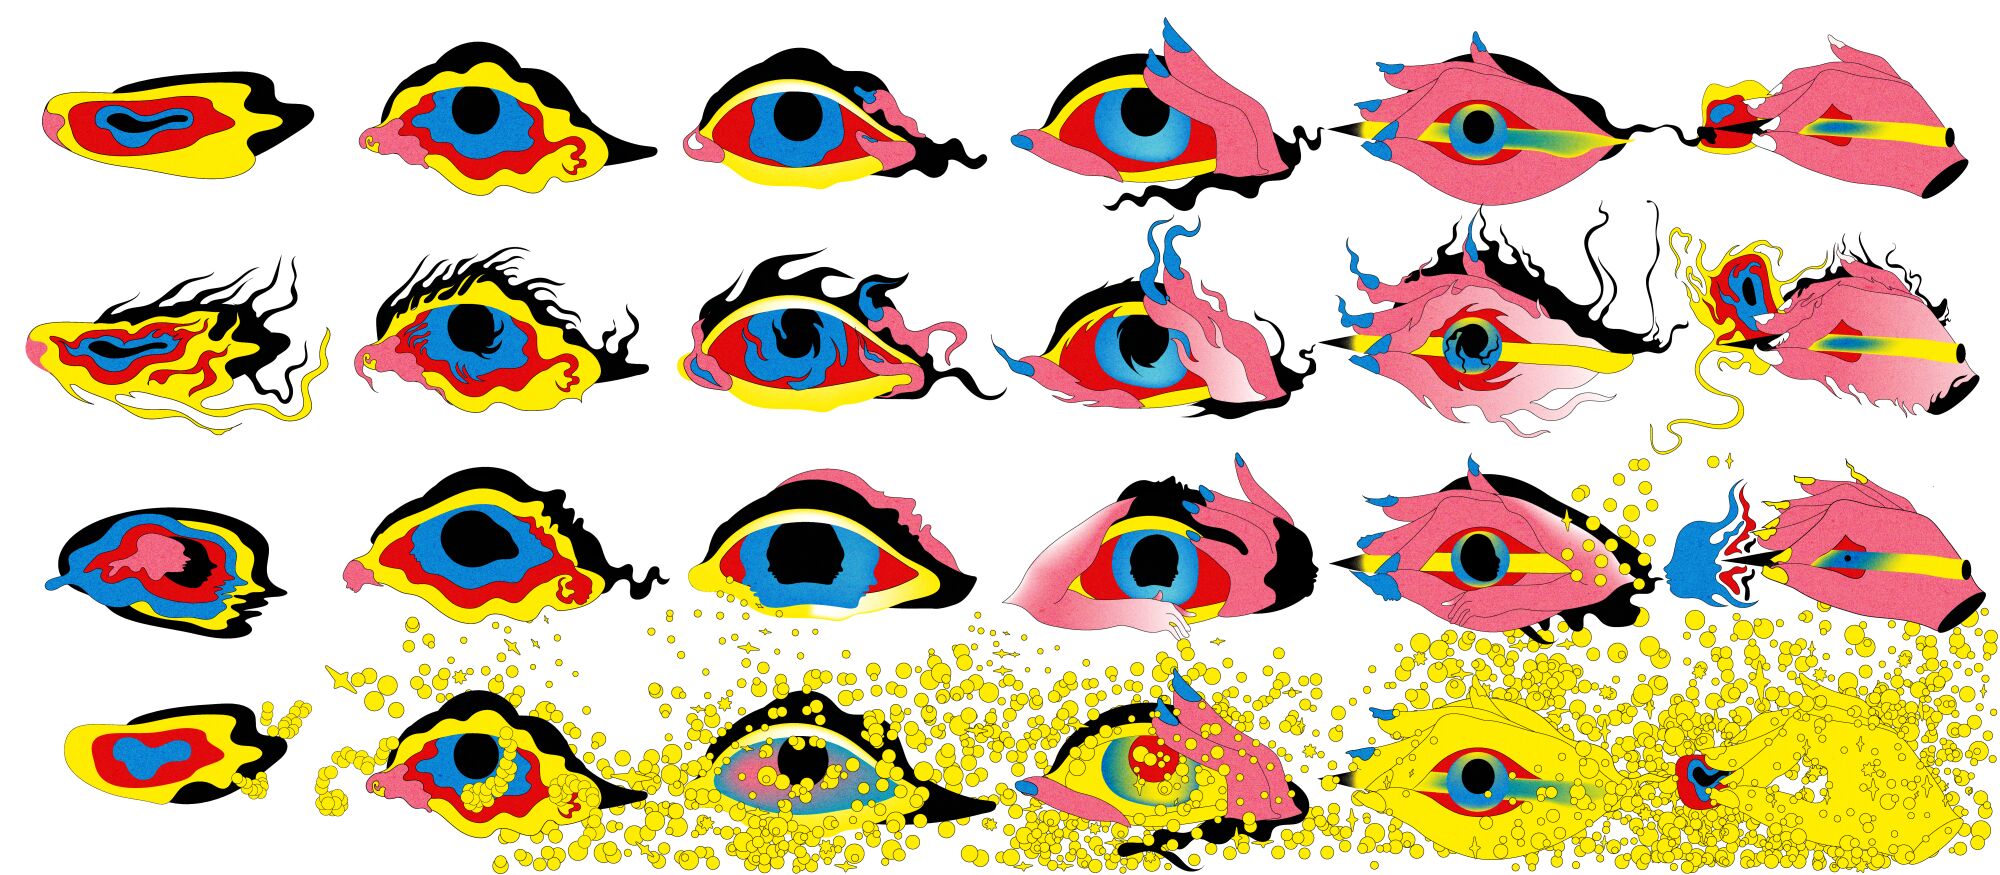 Rows of drawn colorful eyes dissolve into yellow blurs.